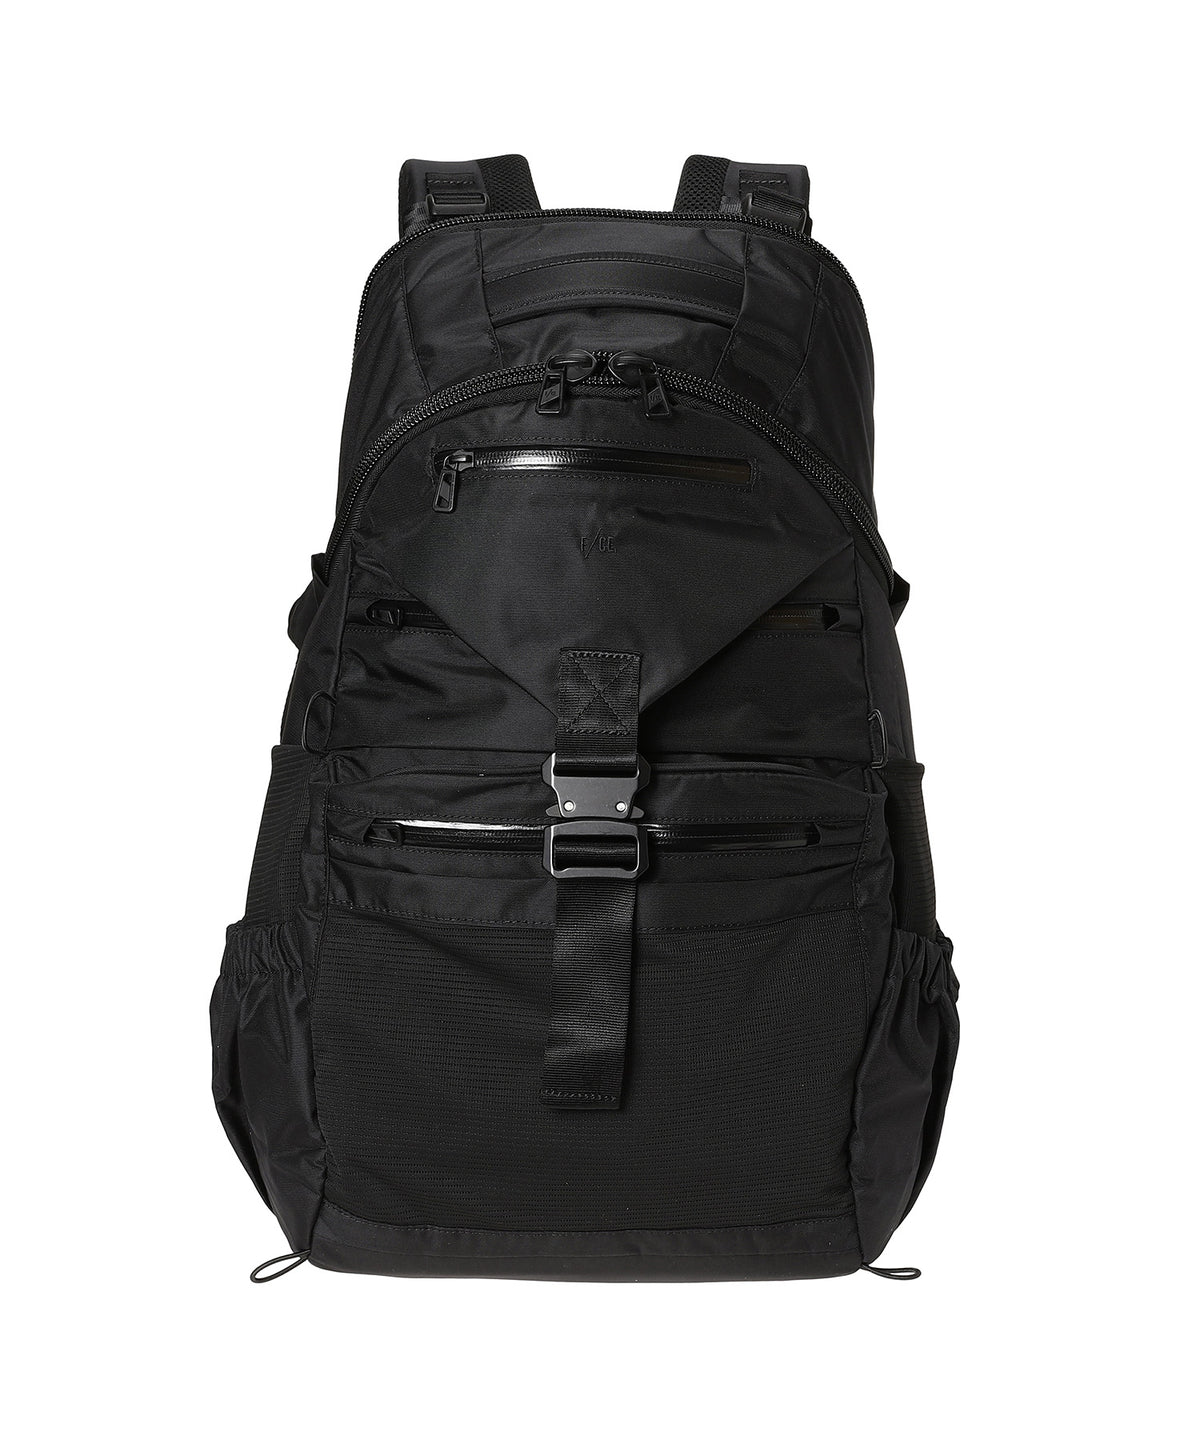 ONEDAY TECHNICAL TRAVEL BACK PACK